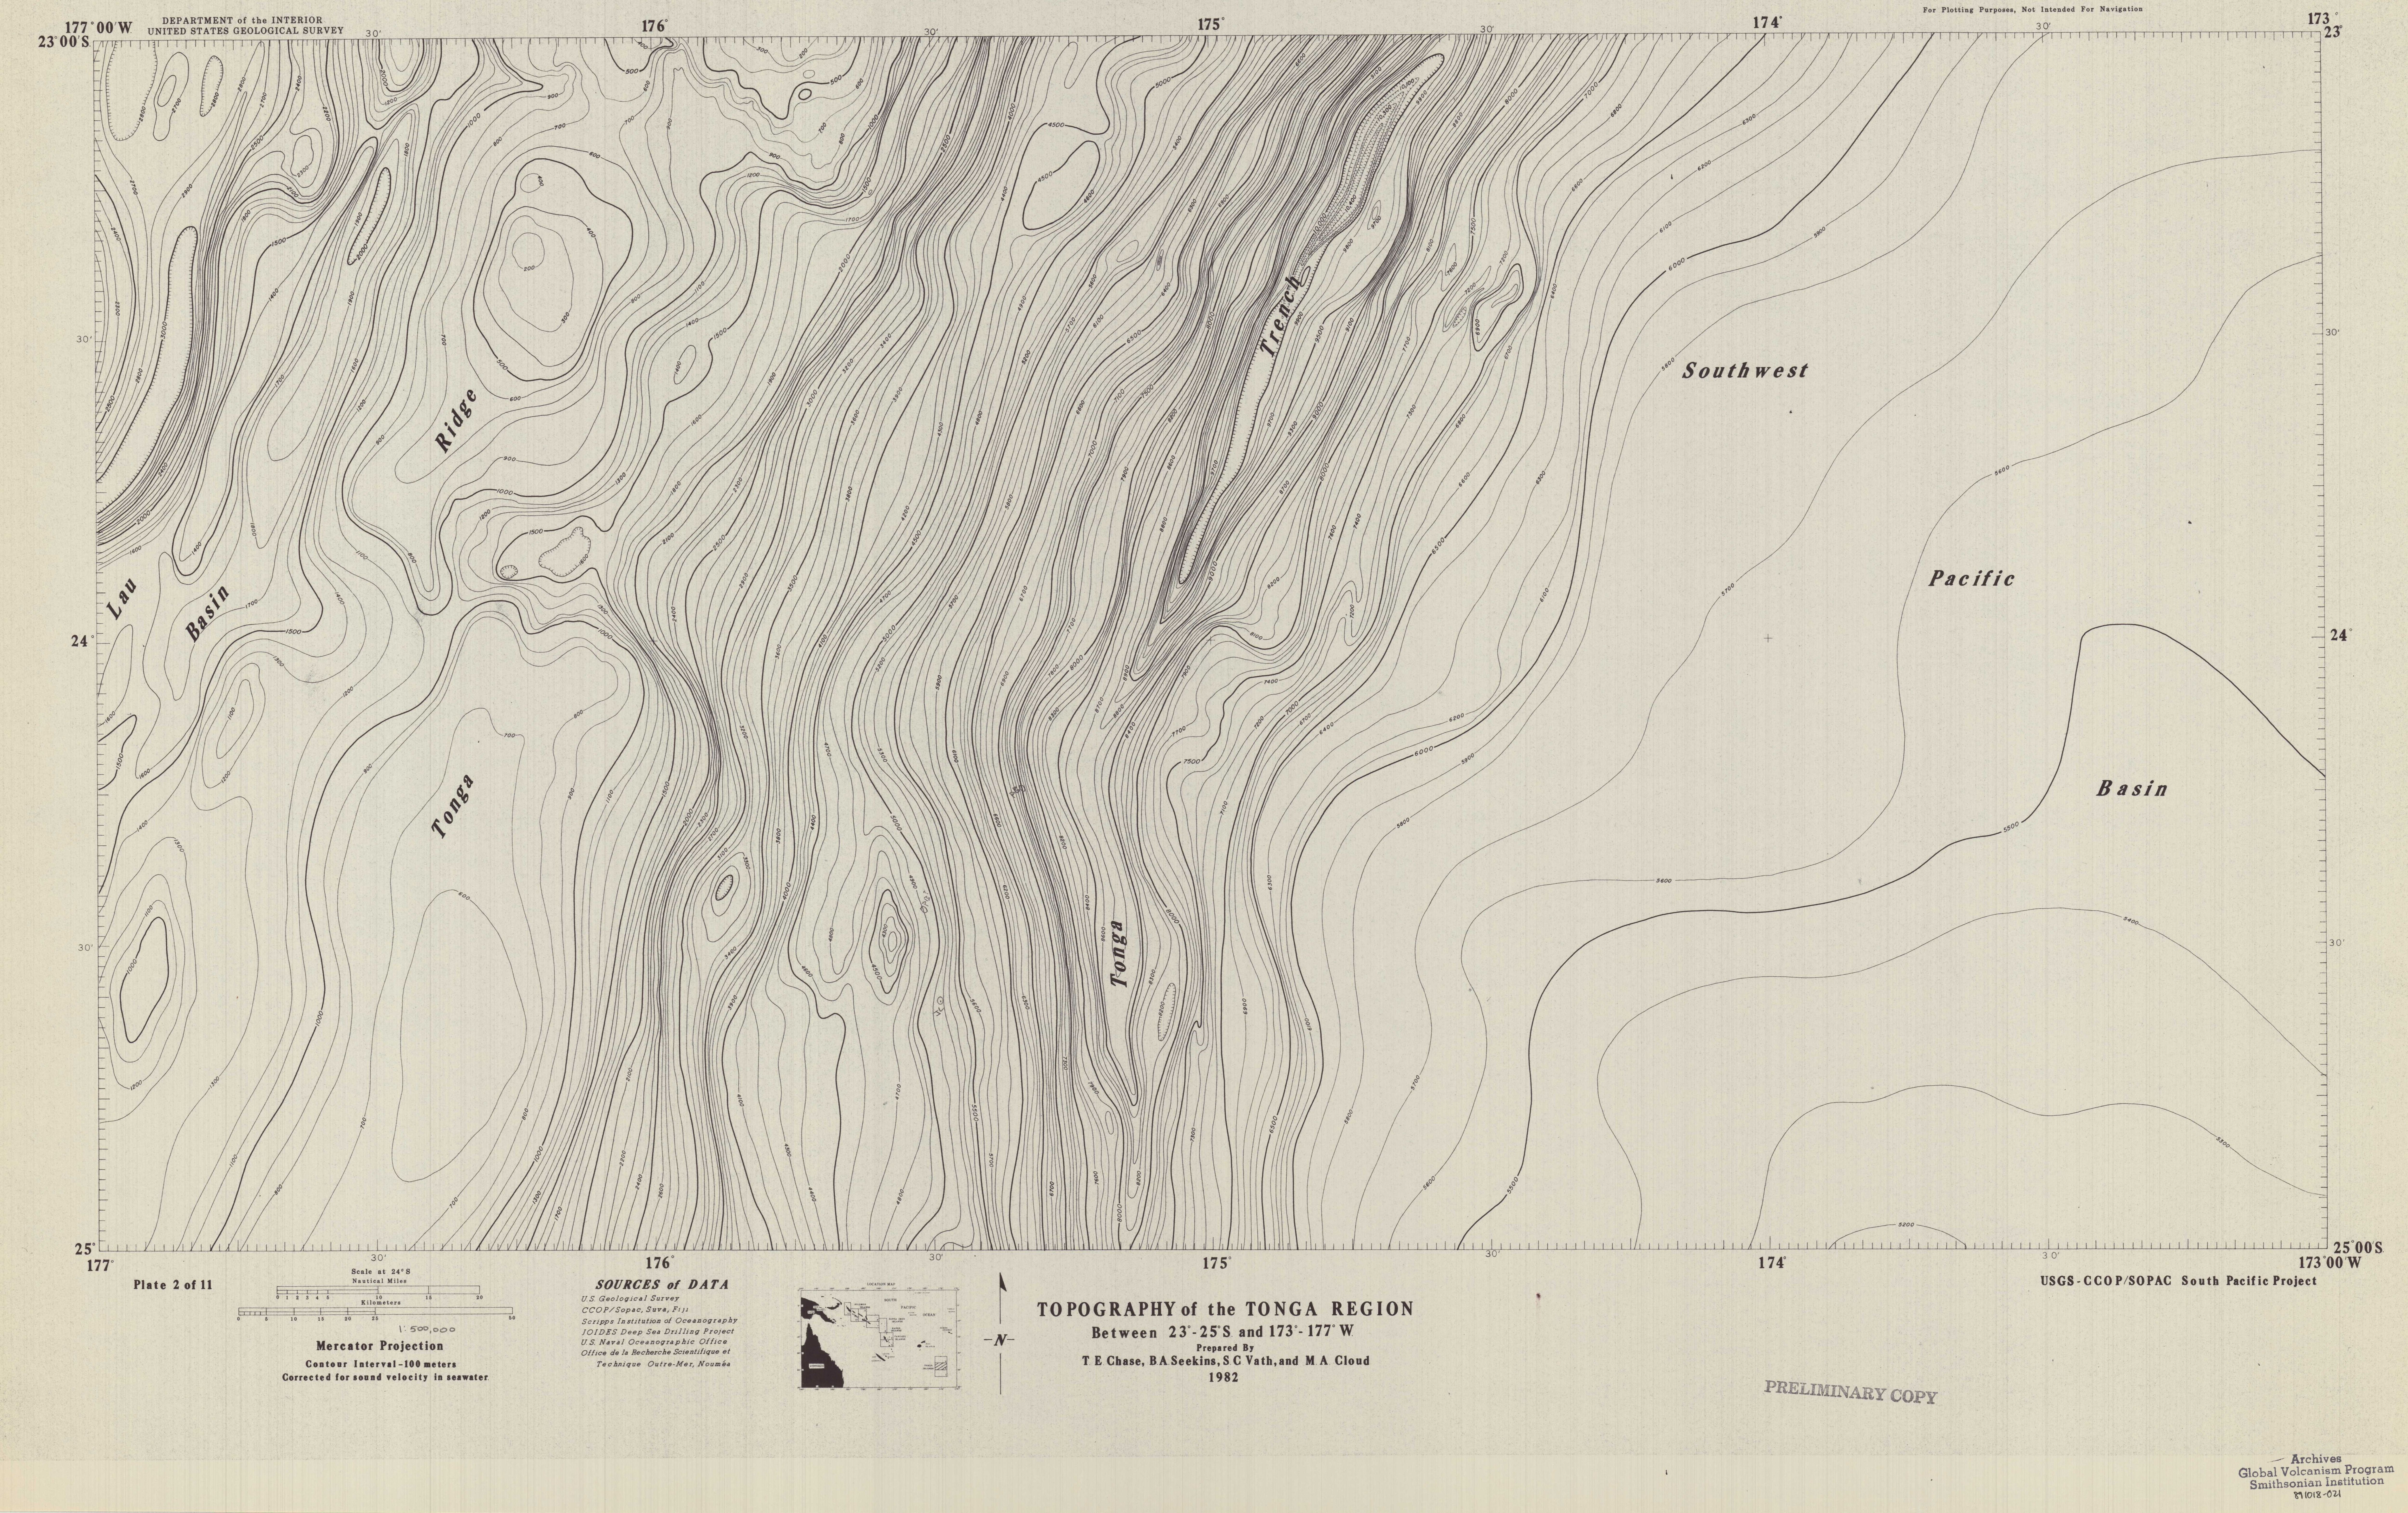 Topography map [Smith and Sandwell, 1997] of the Louisville